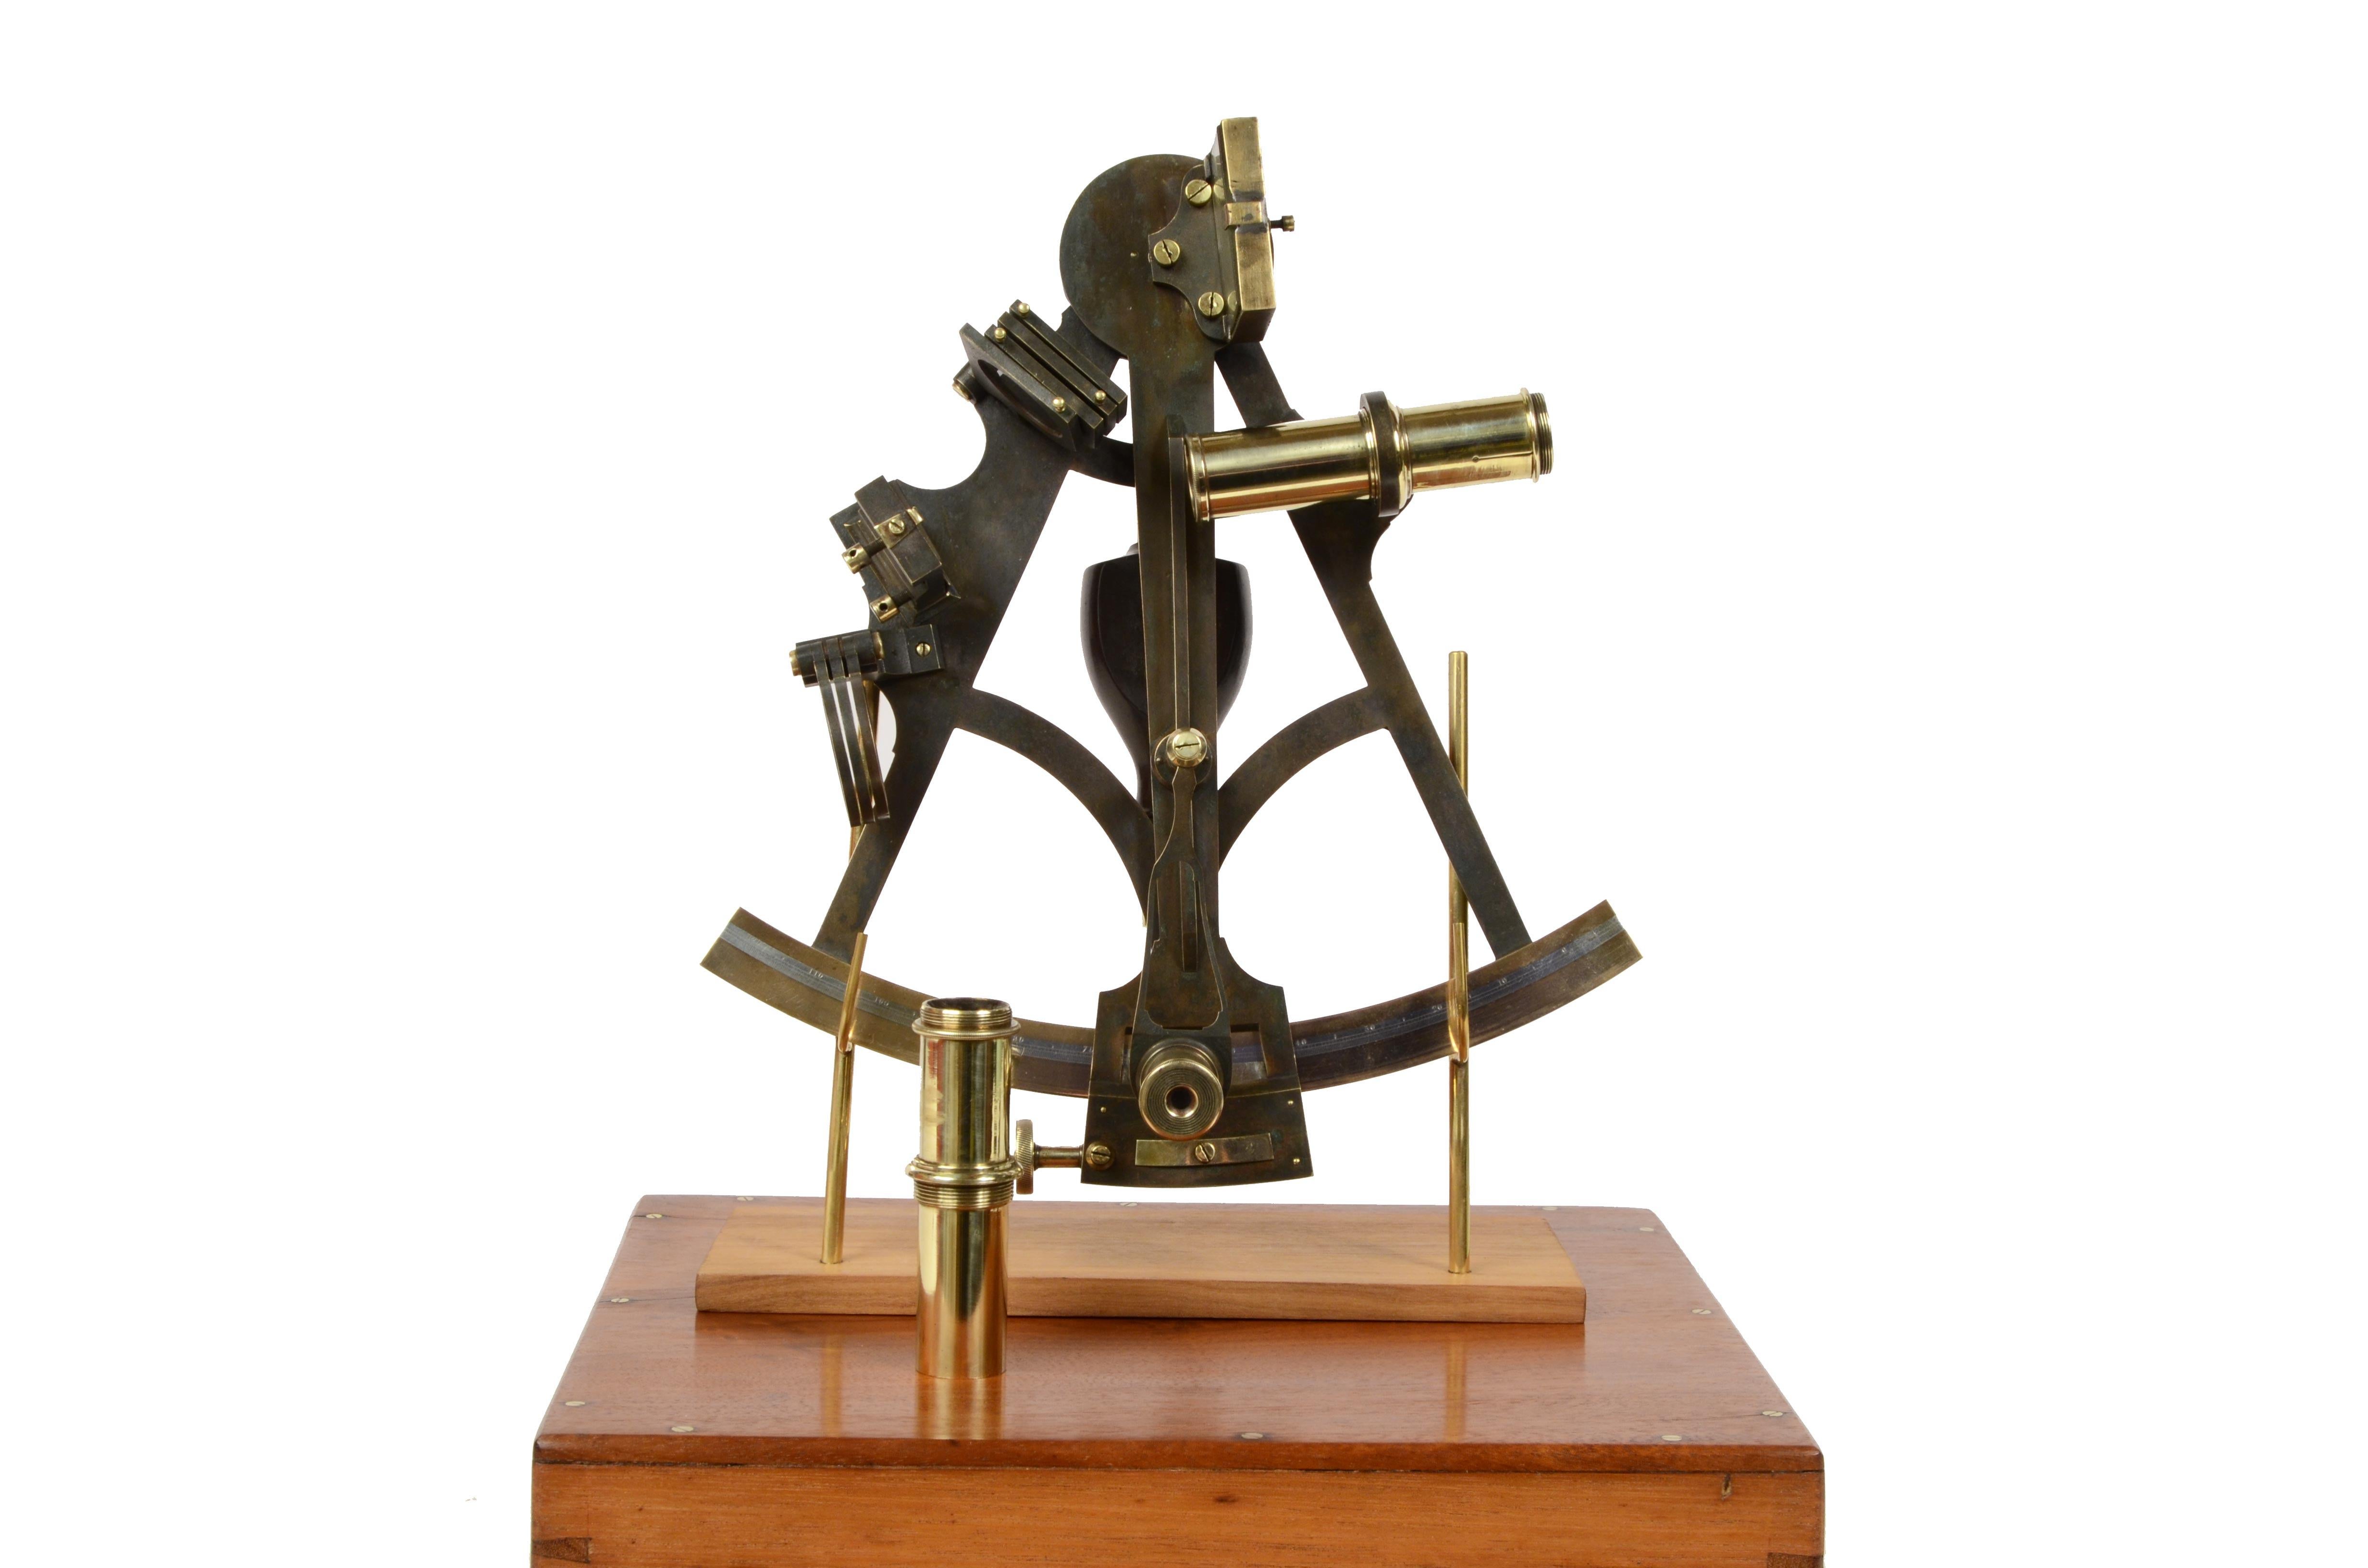 Burnished brass sextant signed J.C. Krohn Bergen of the second half of XIX century complete with lenses and accessories, placed in its beautiful original wood box complete with lock and brass hinges. Flap and vernier made of silver, wooden handle, 3